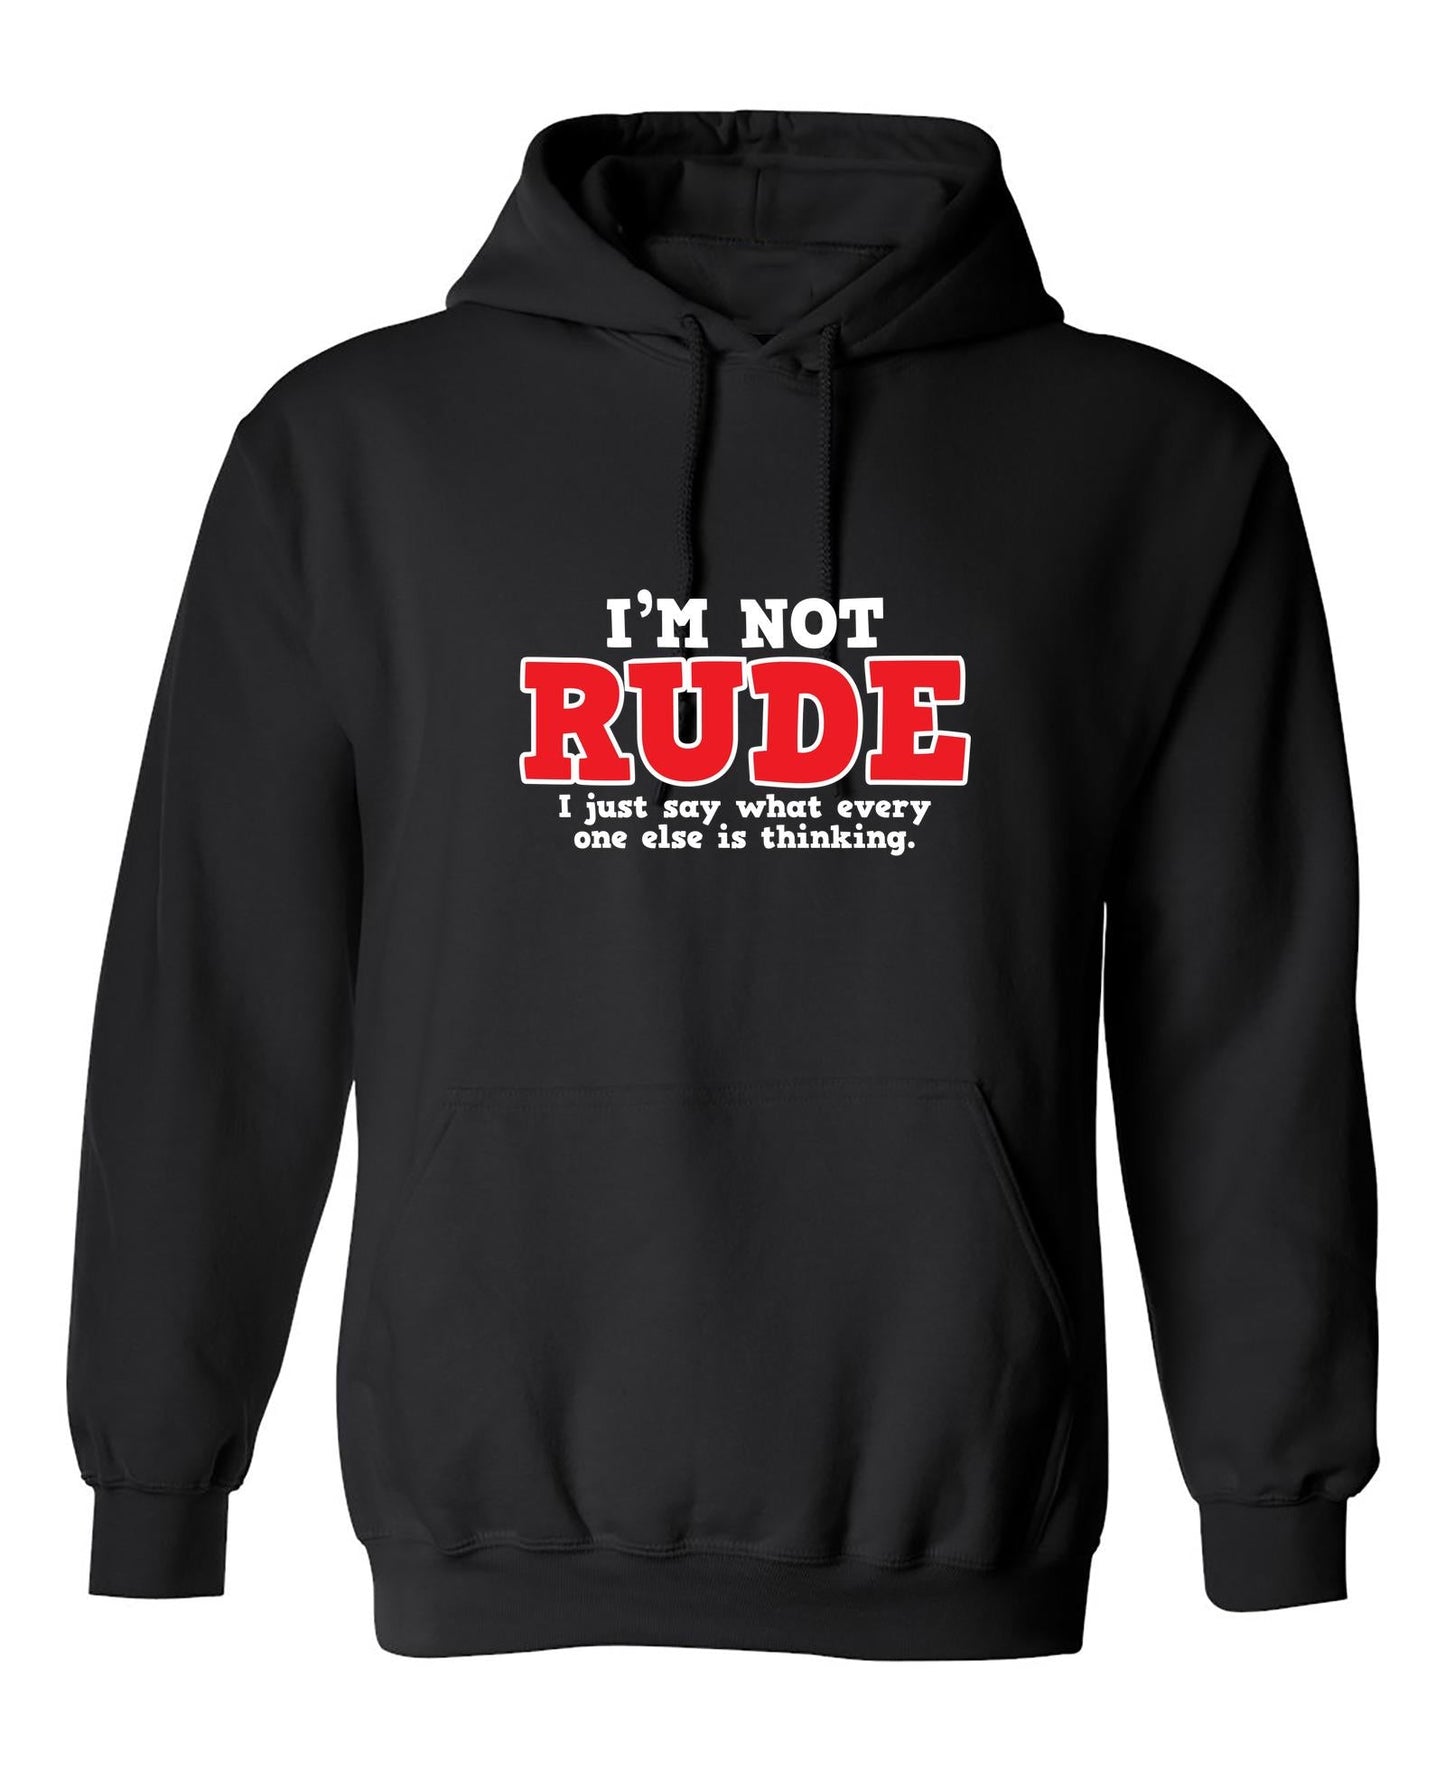 Funny T-Shirts design "I'm Not Rude. I Just Say What Every One Else Is Thinking"